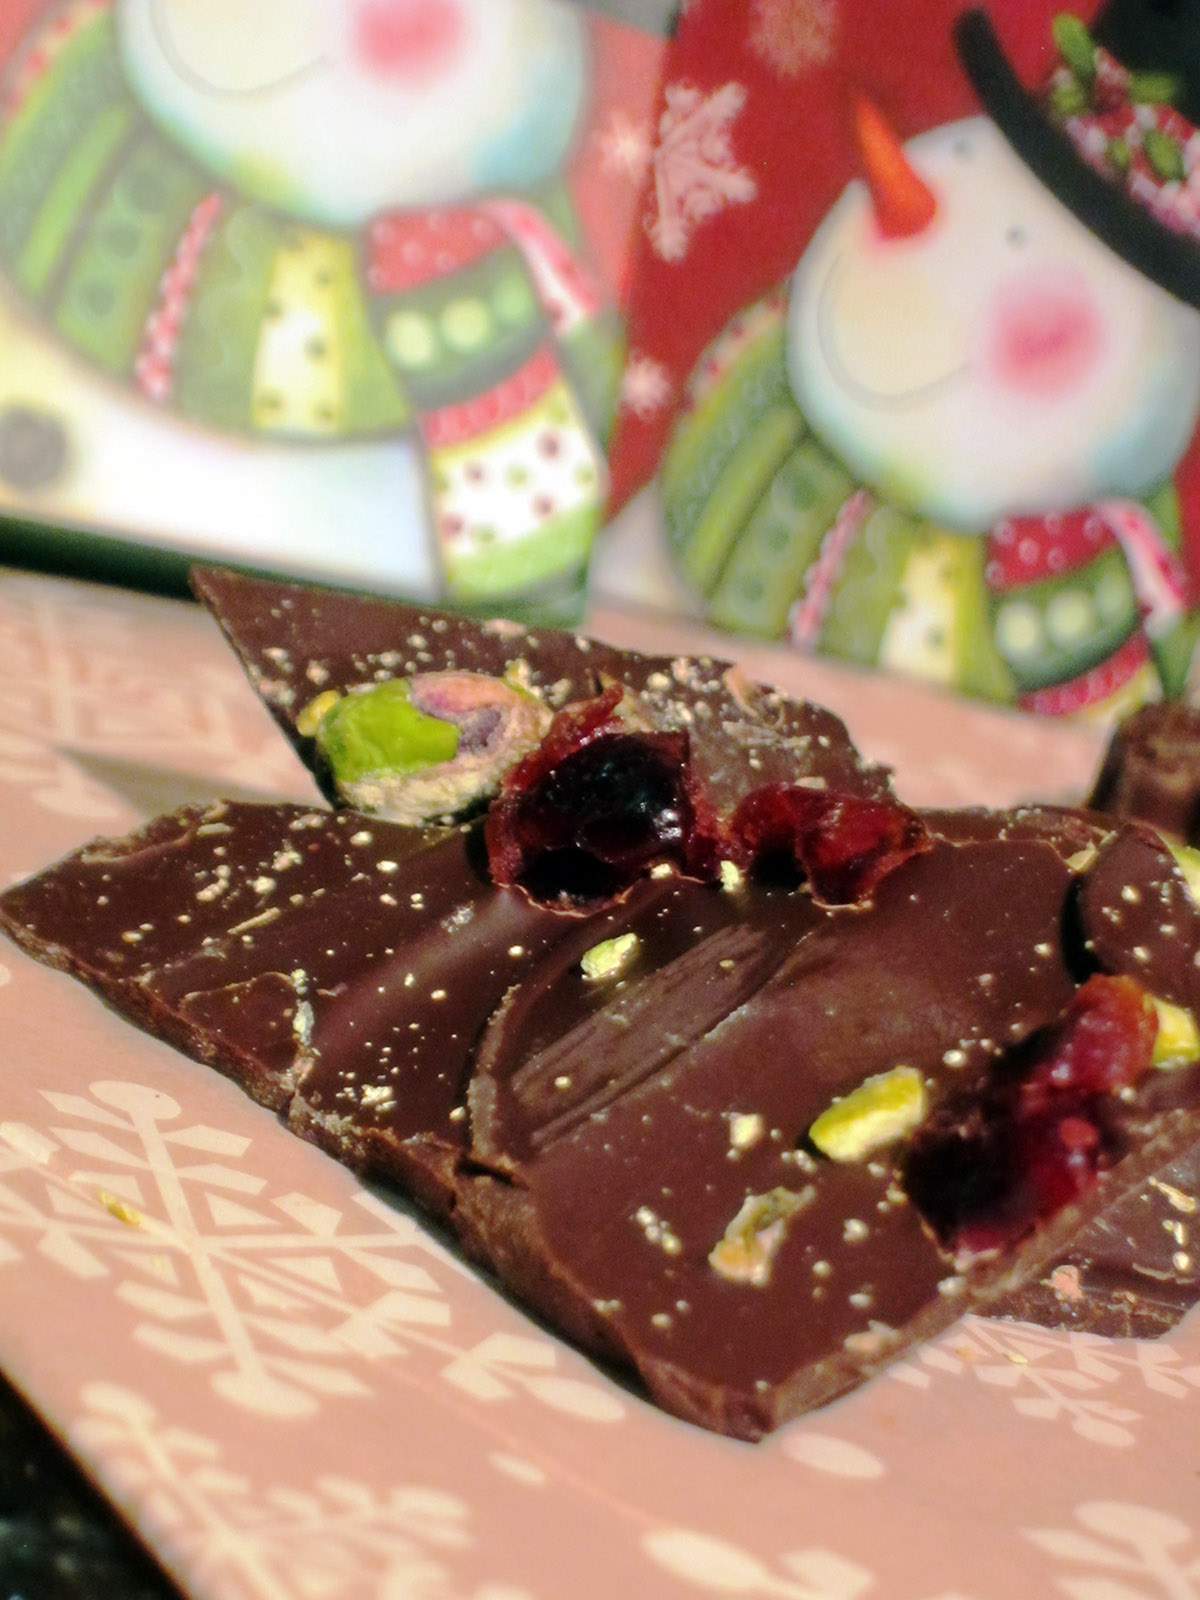 DIY Holiday Gift Making: Coconut Oil Chocolate Bark with Cranberries and Pistachios